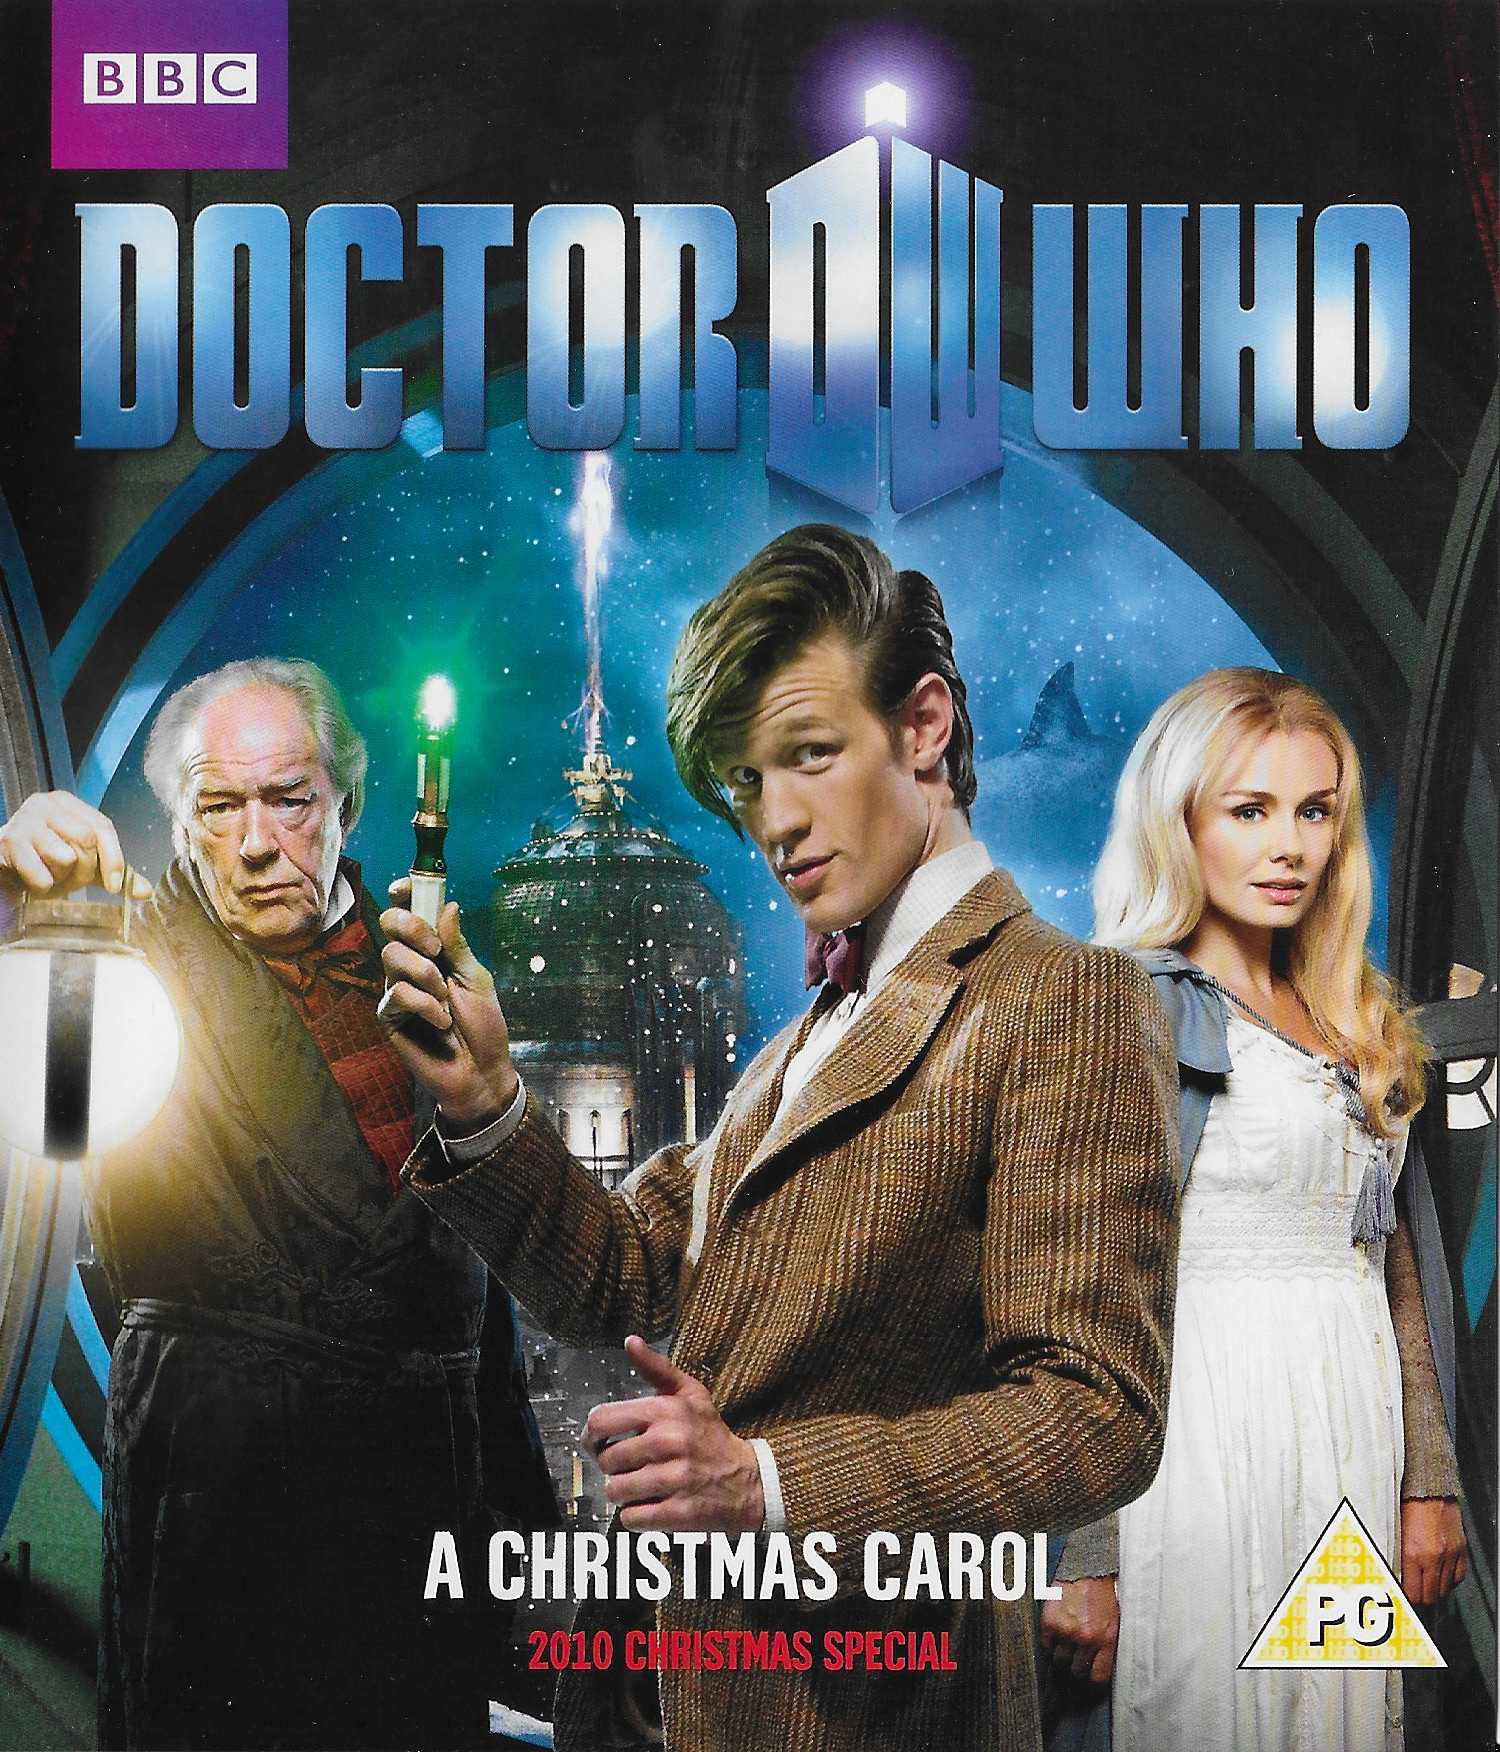 Picture of BBCBD 0132 Doctor Who - A Christmas carol by artist Steven Moffat from the BBC blu-rays - Records and Tapes library